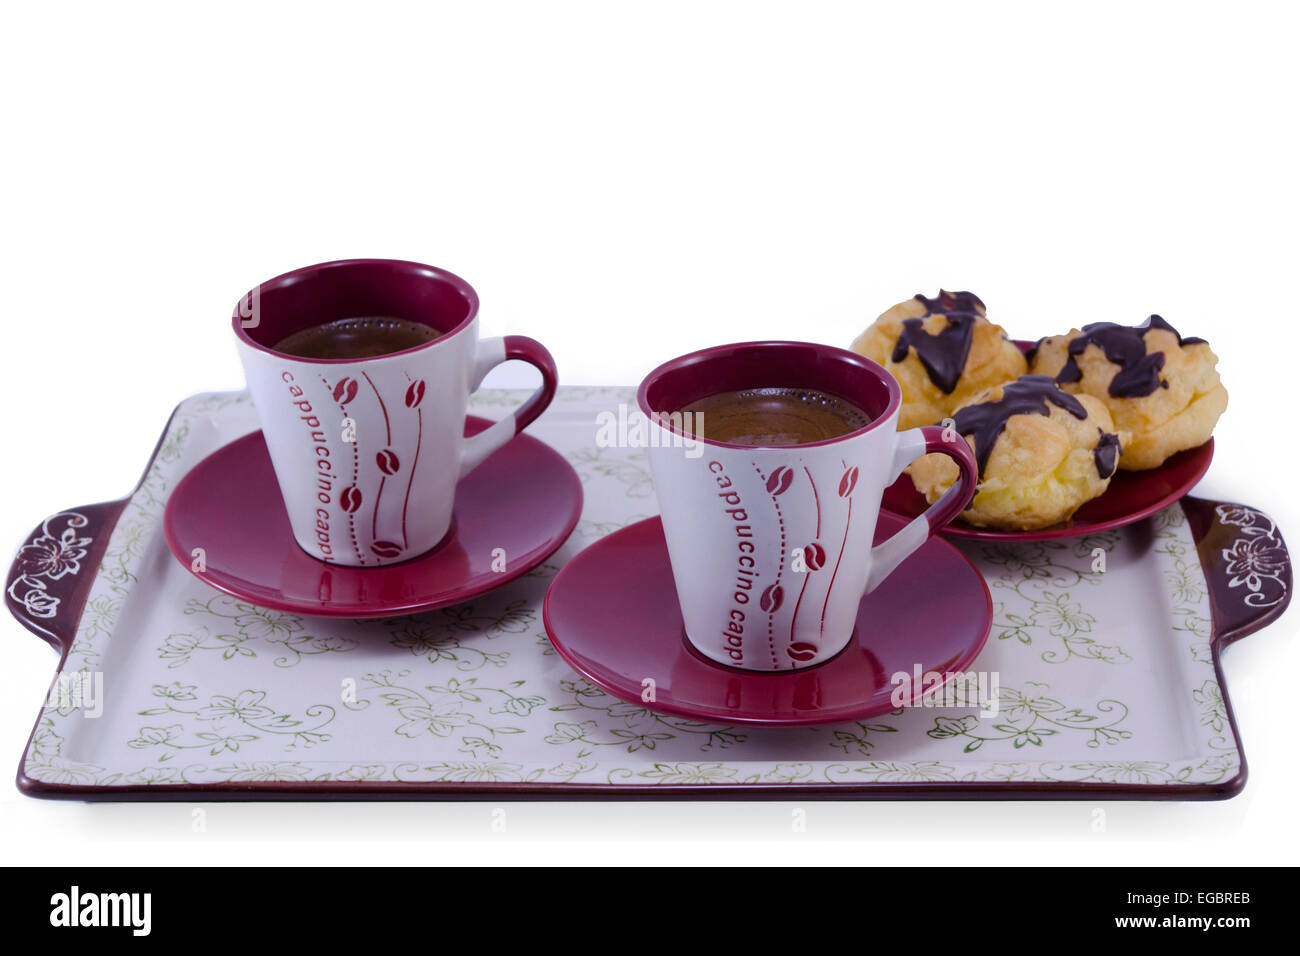 Two cups of coffee and a sweet pastry on a serving tray, isolated, Stock Photo